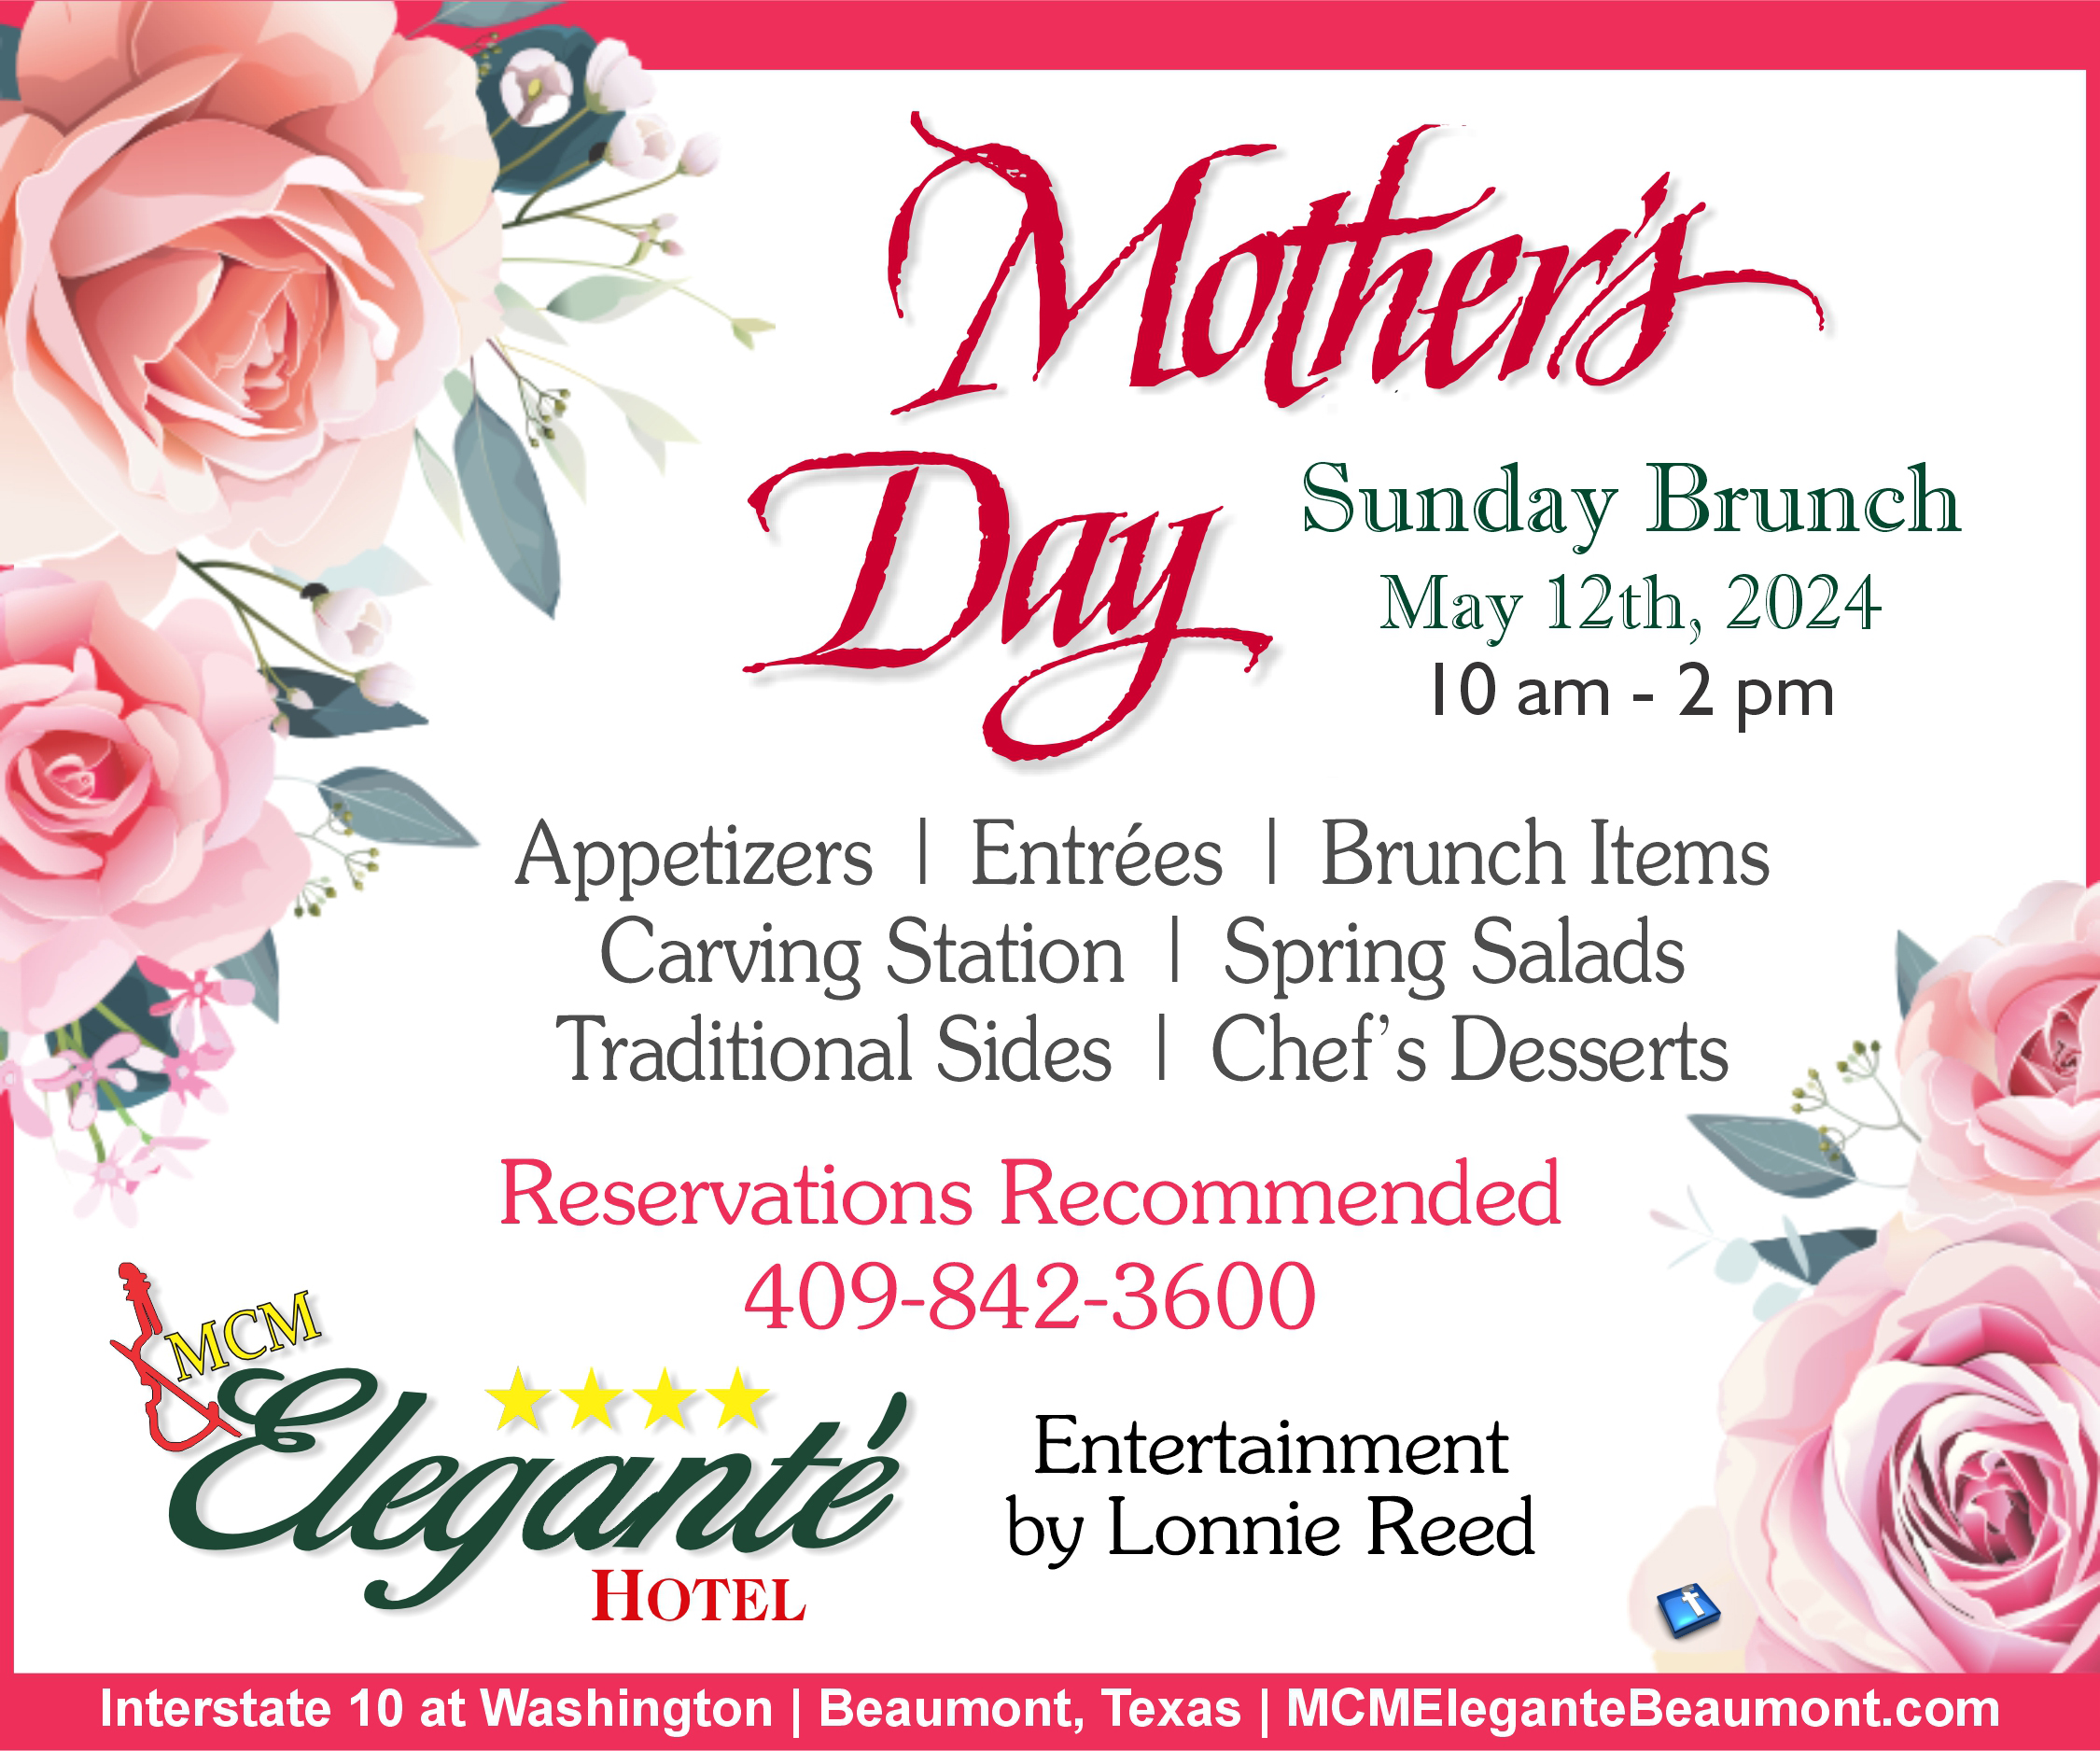 Mother's Day Sunday Brunch - May 12, 2024 from 10 am - 2 pm - Reservations recommended - (409) 842-3600